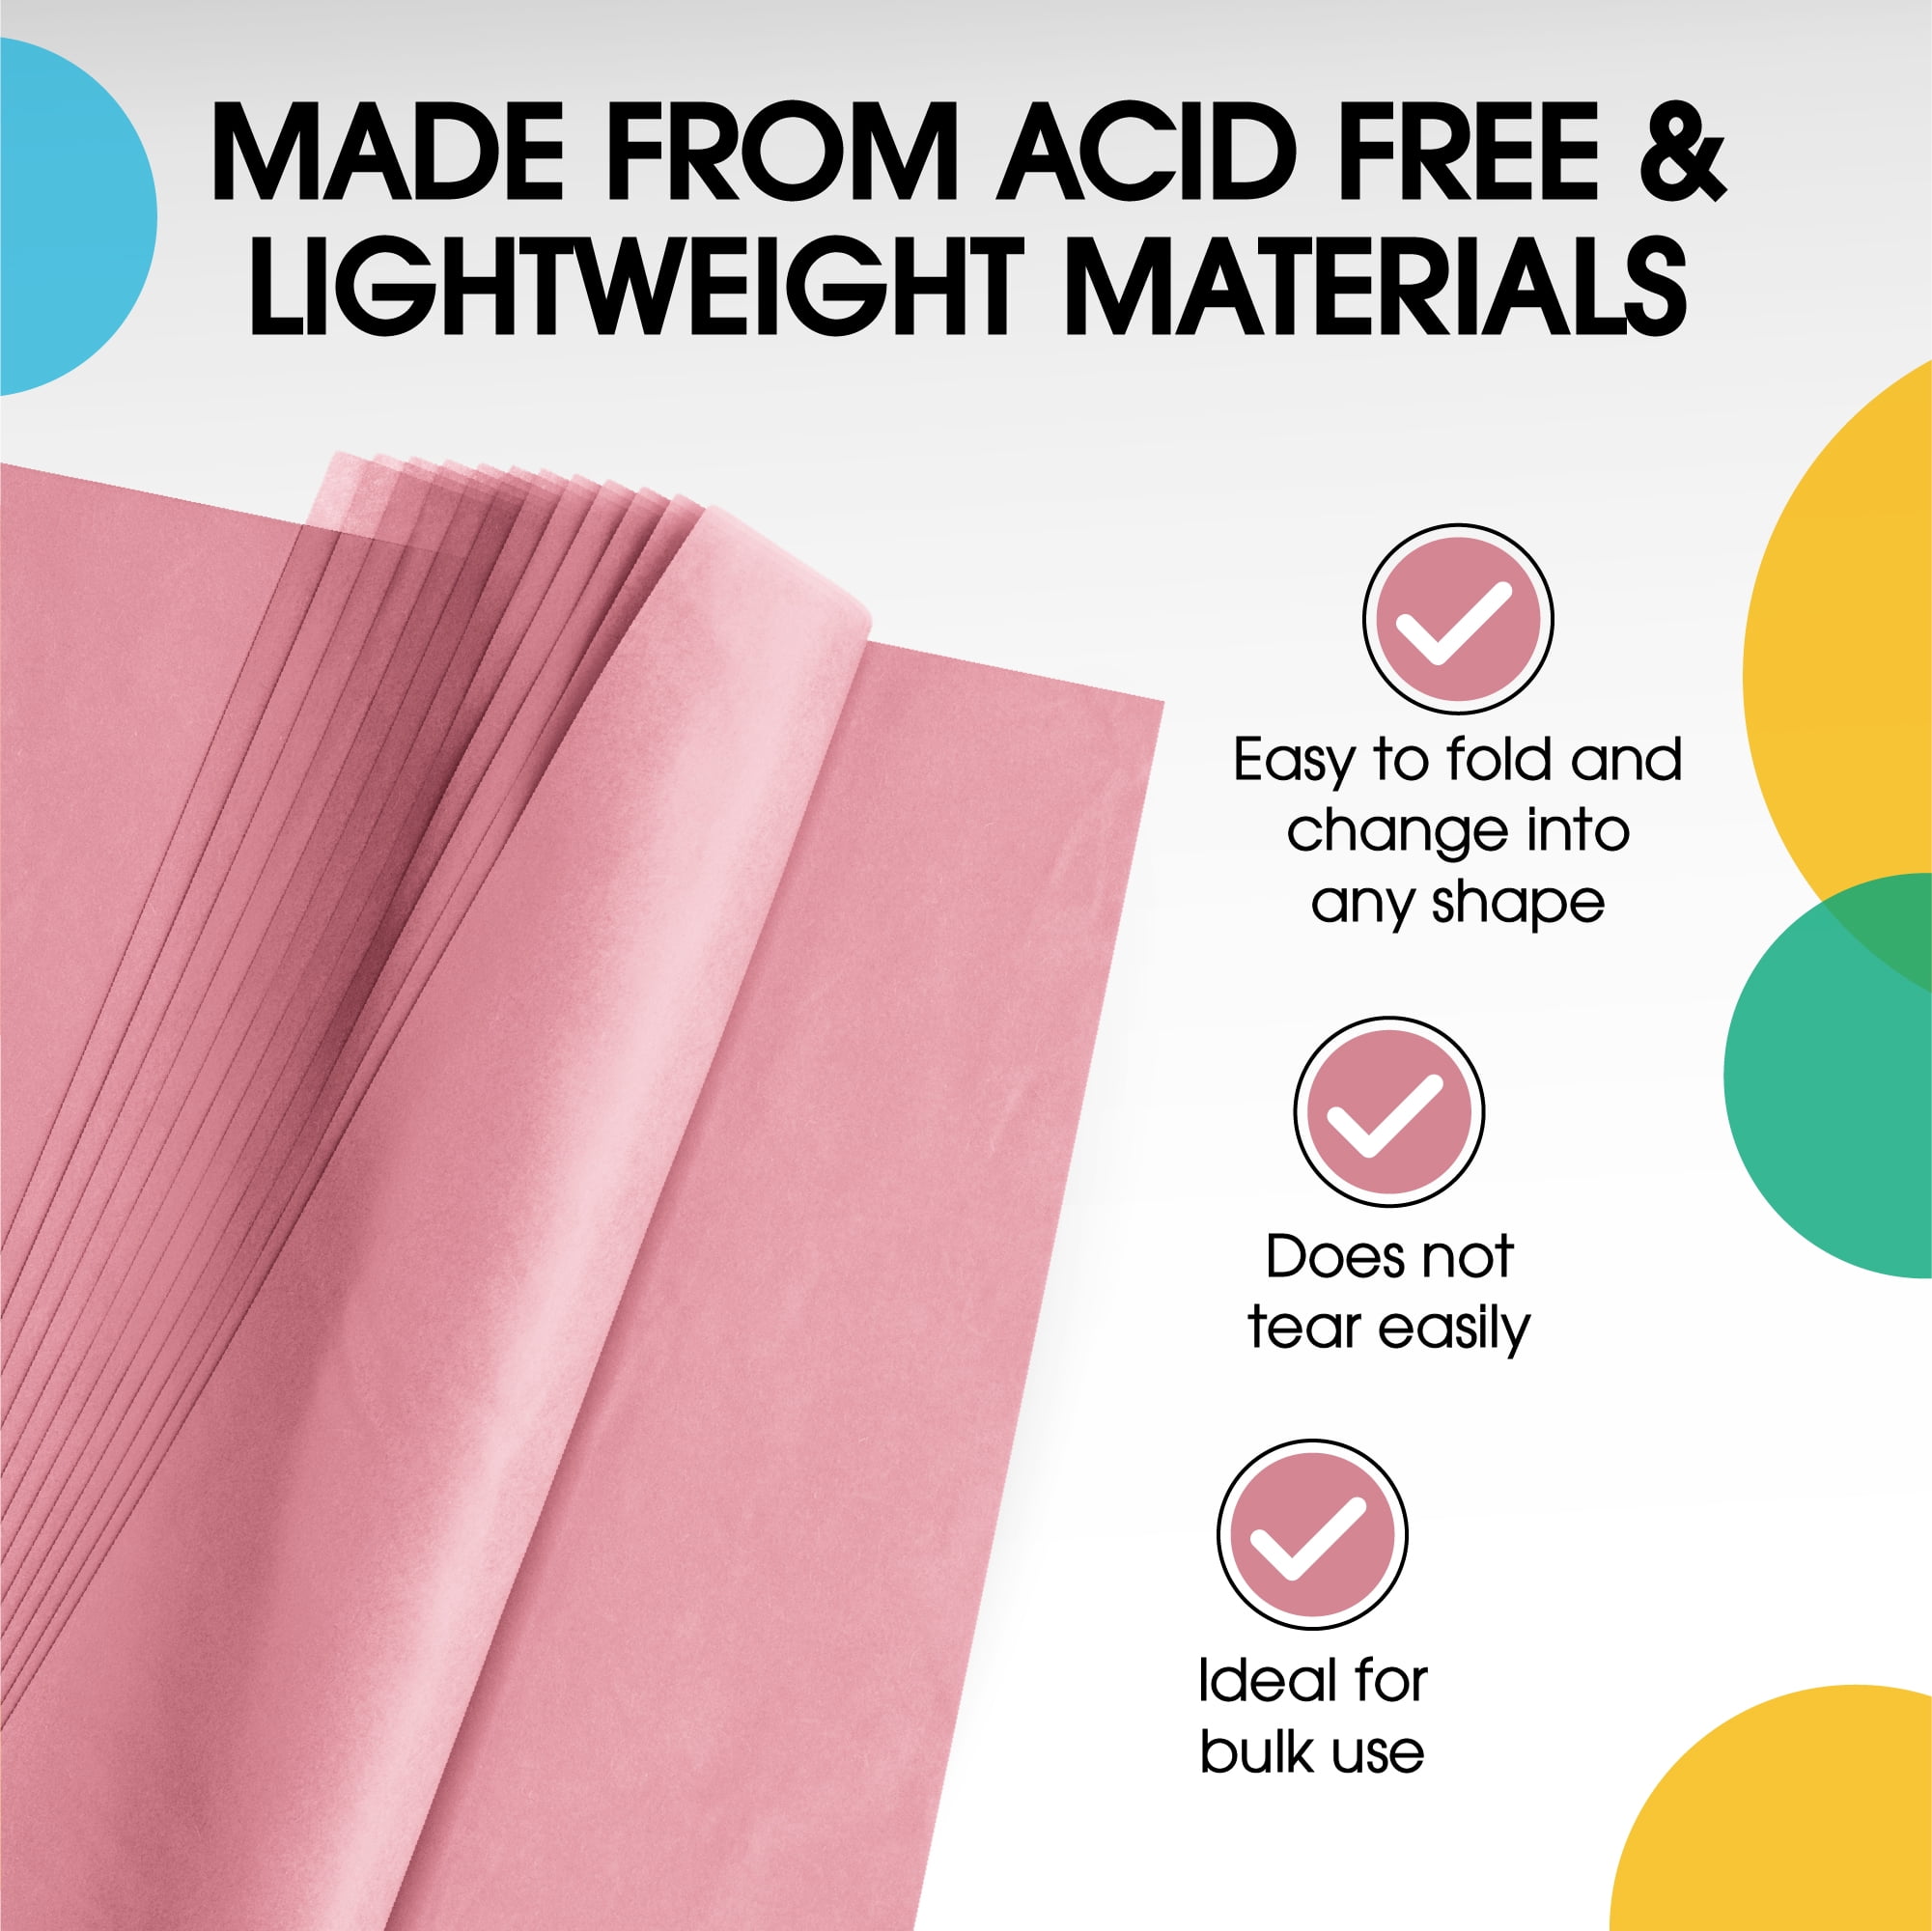 SatinWrap Solid Light Pink Tissue Paper Sheets, Size 20 x 30